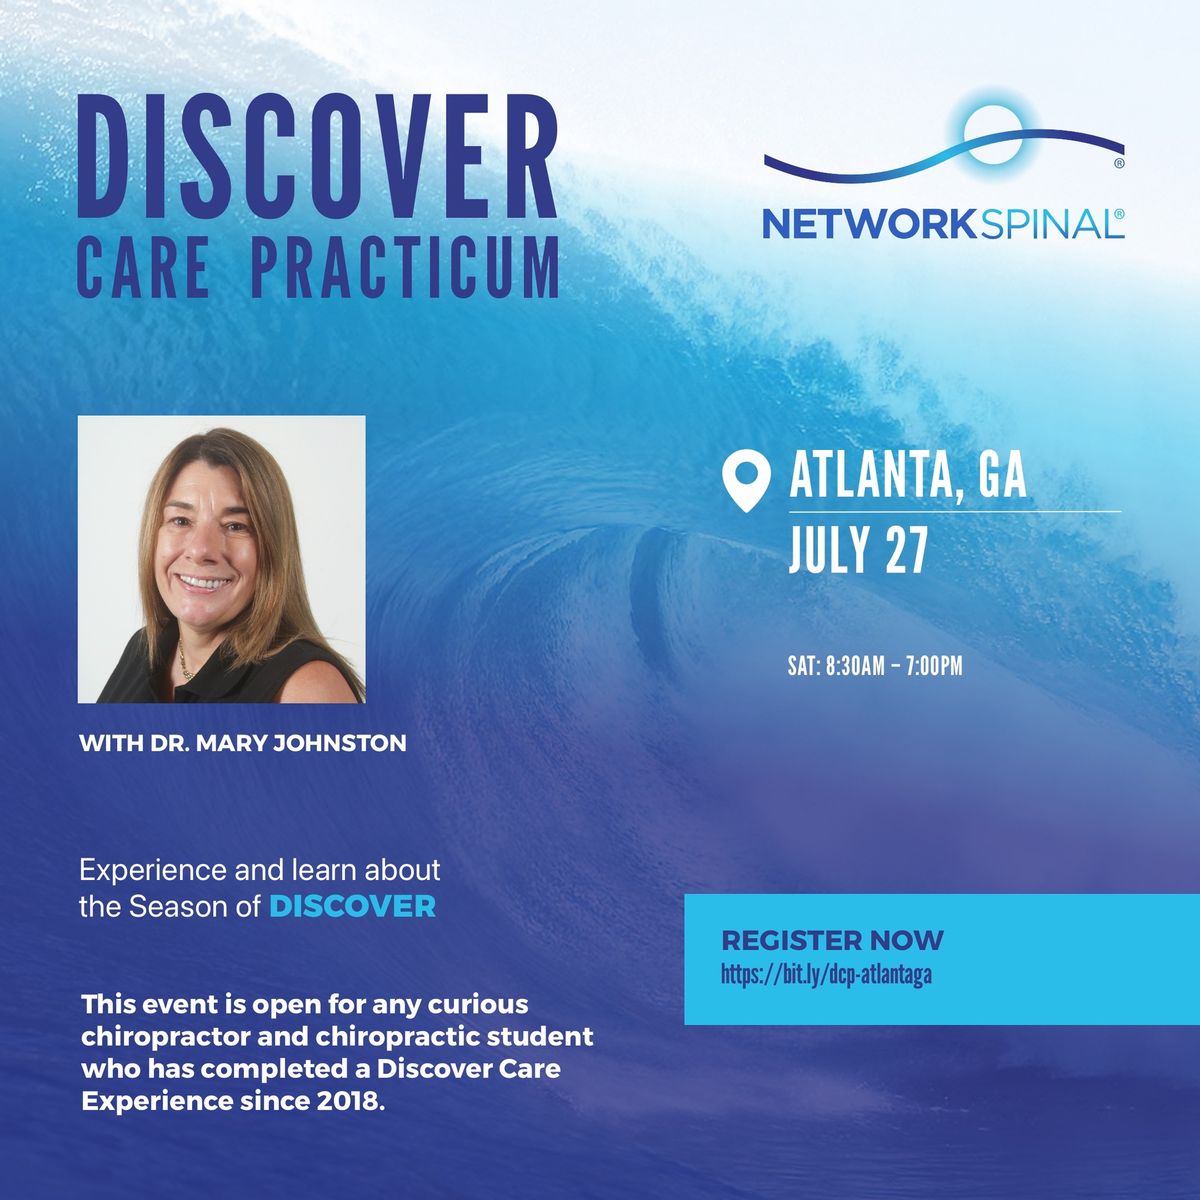 NetworkSpinal Discover Care Practicum with Dr. Mary Johnston